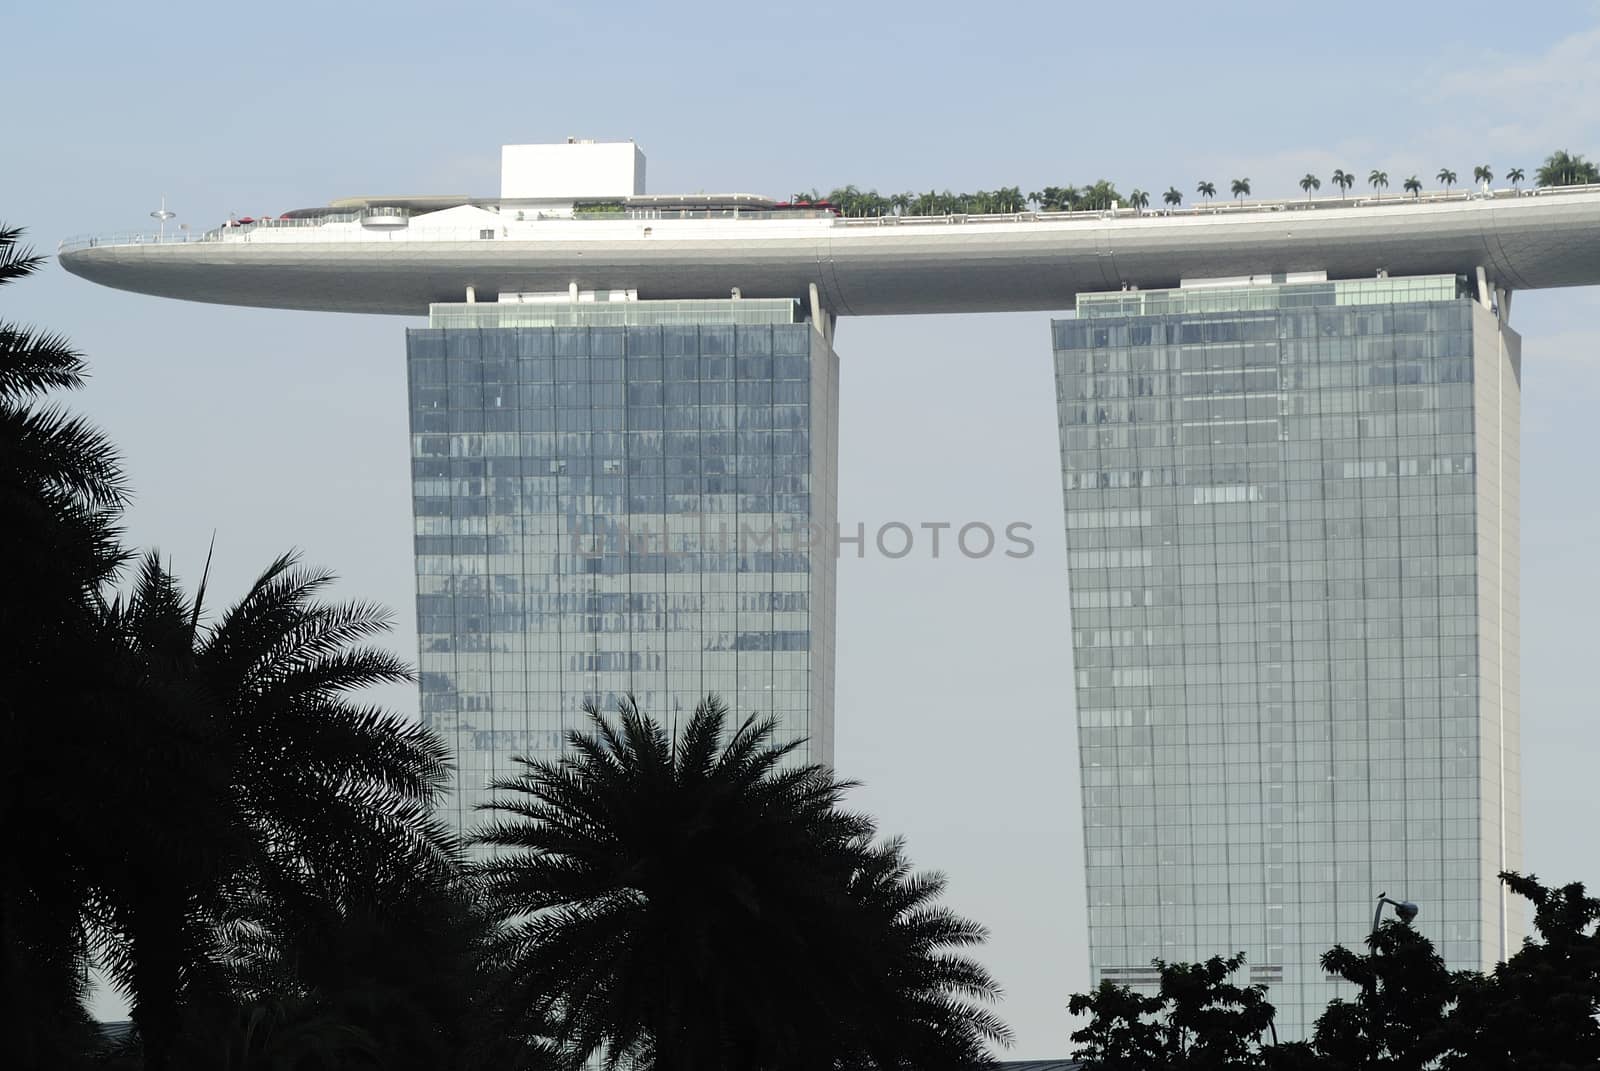 SINGAPORE - APRIL 30: Marina Bay Sands Hotel in day on April 30, 2012 on Singapore. This hotel is billed as the world's most expensive standalone casino property at S$8 billion.